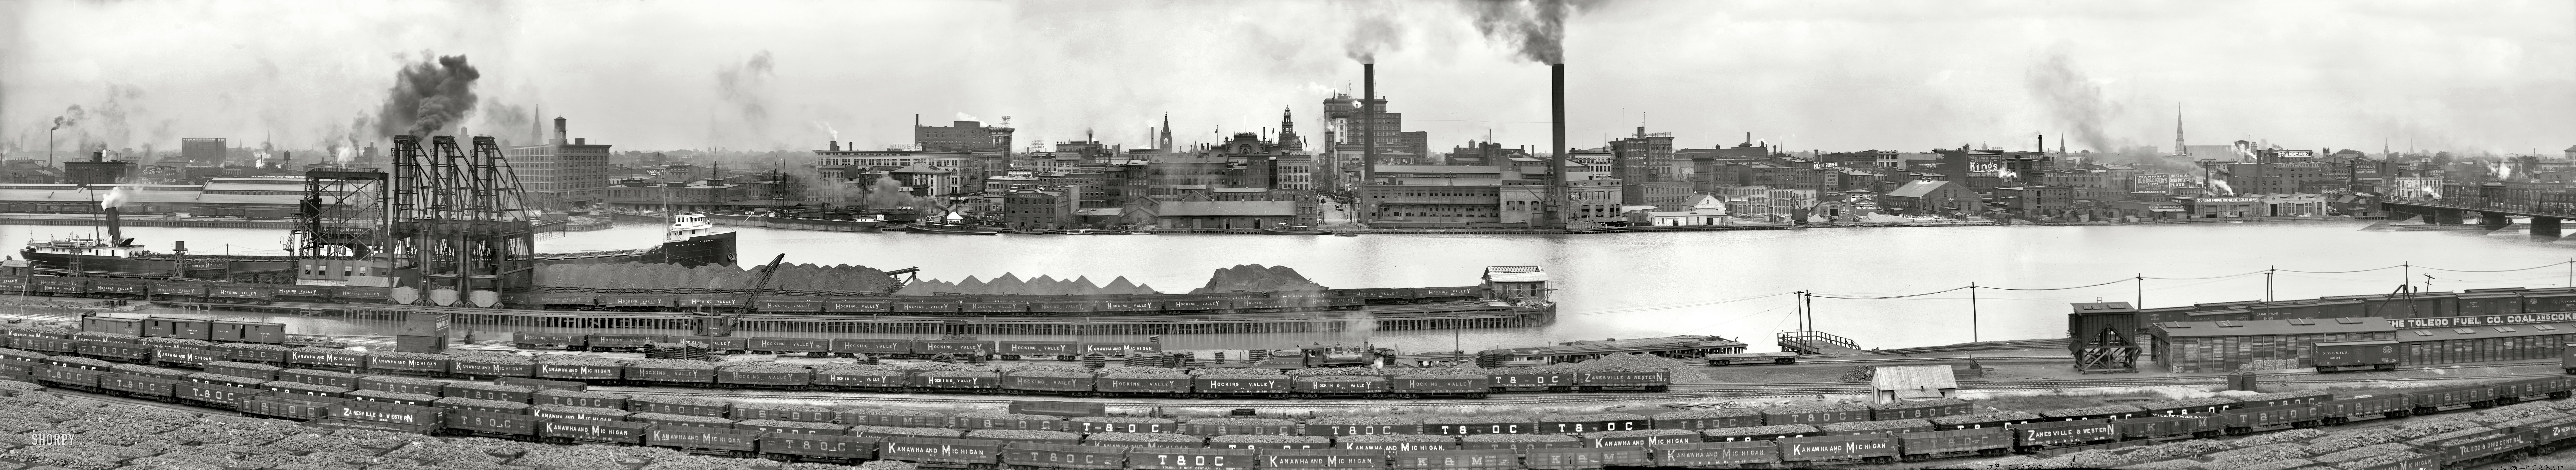 Circa 1909. "Toledo, Ohio, waterfront on Maumee River." Humongous 40,000-pixel-wide panorama made from five 8x10 glass negatives, downsized here to a still-hefty 11,000 pixels. Detroit Publishing Company. View full size.